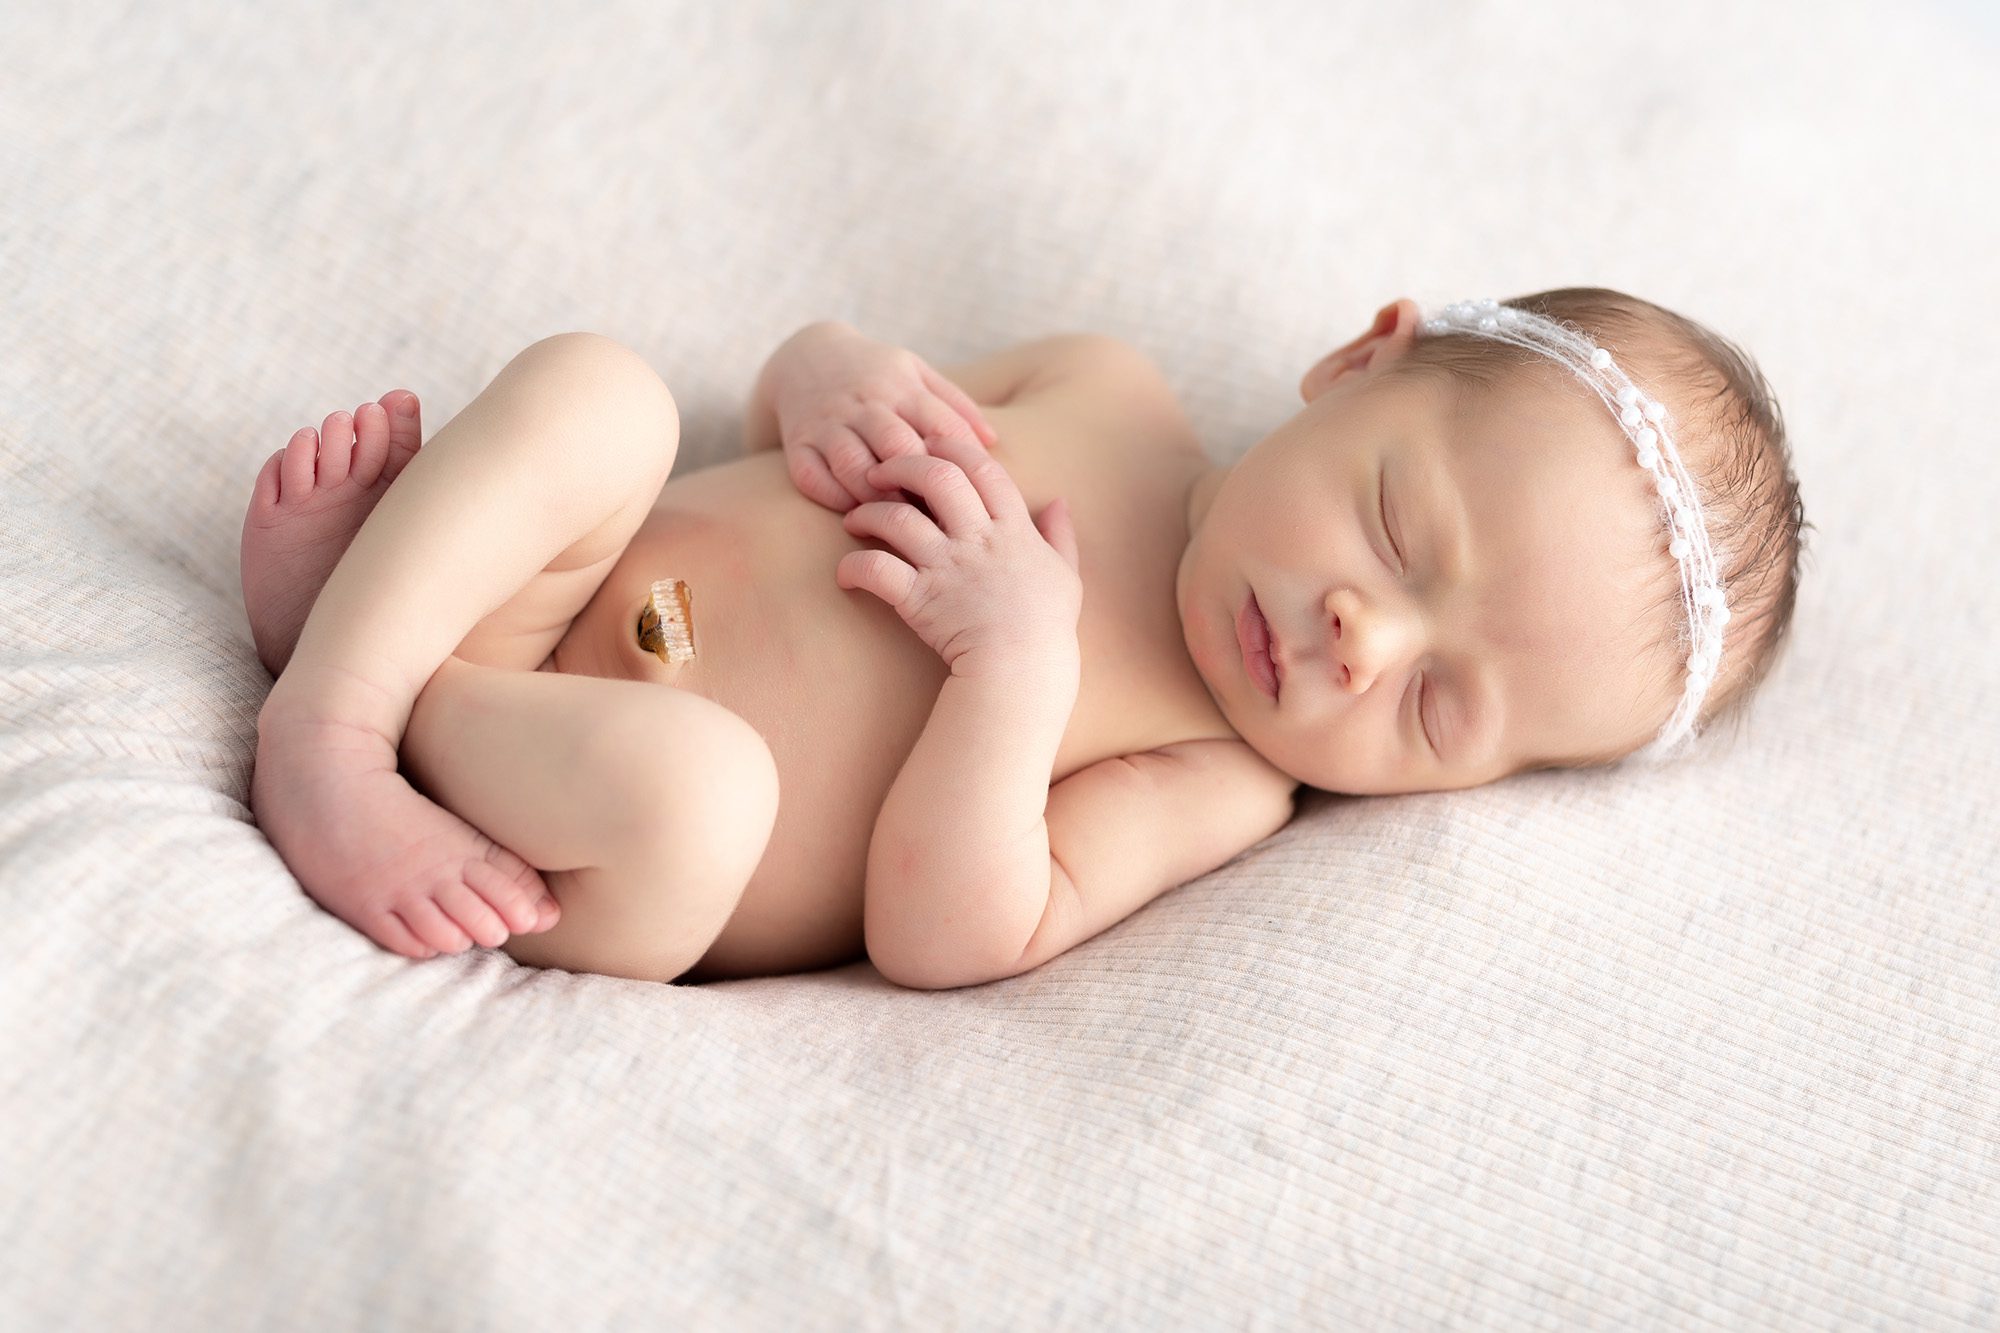 Authentic newborn photography for your home.